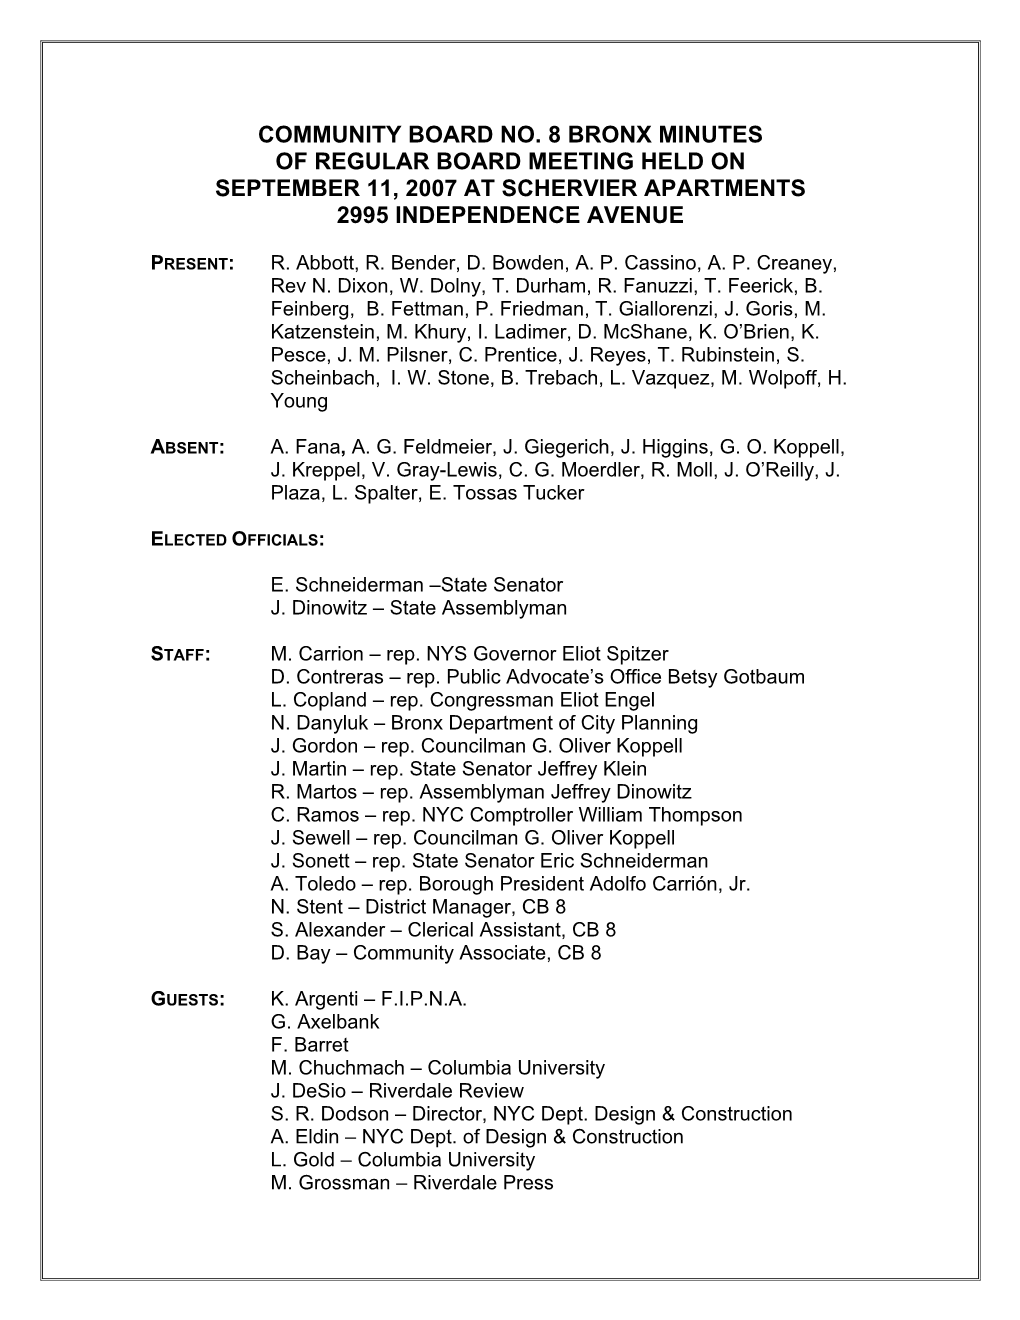 Community Board No. 8 Bronx Minutes of Regular Board Meeting Held on September 11, 2007 at Schervier Apartments 2995 Independence Avenue